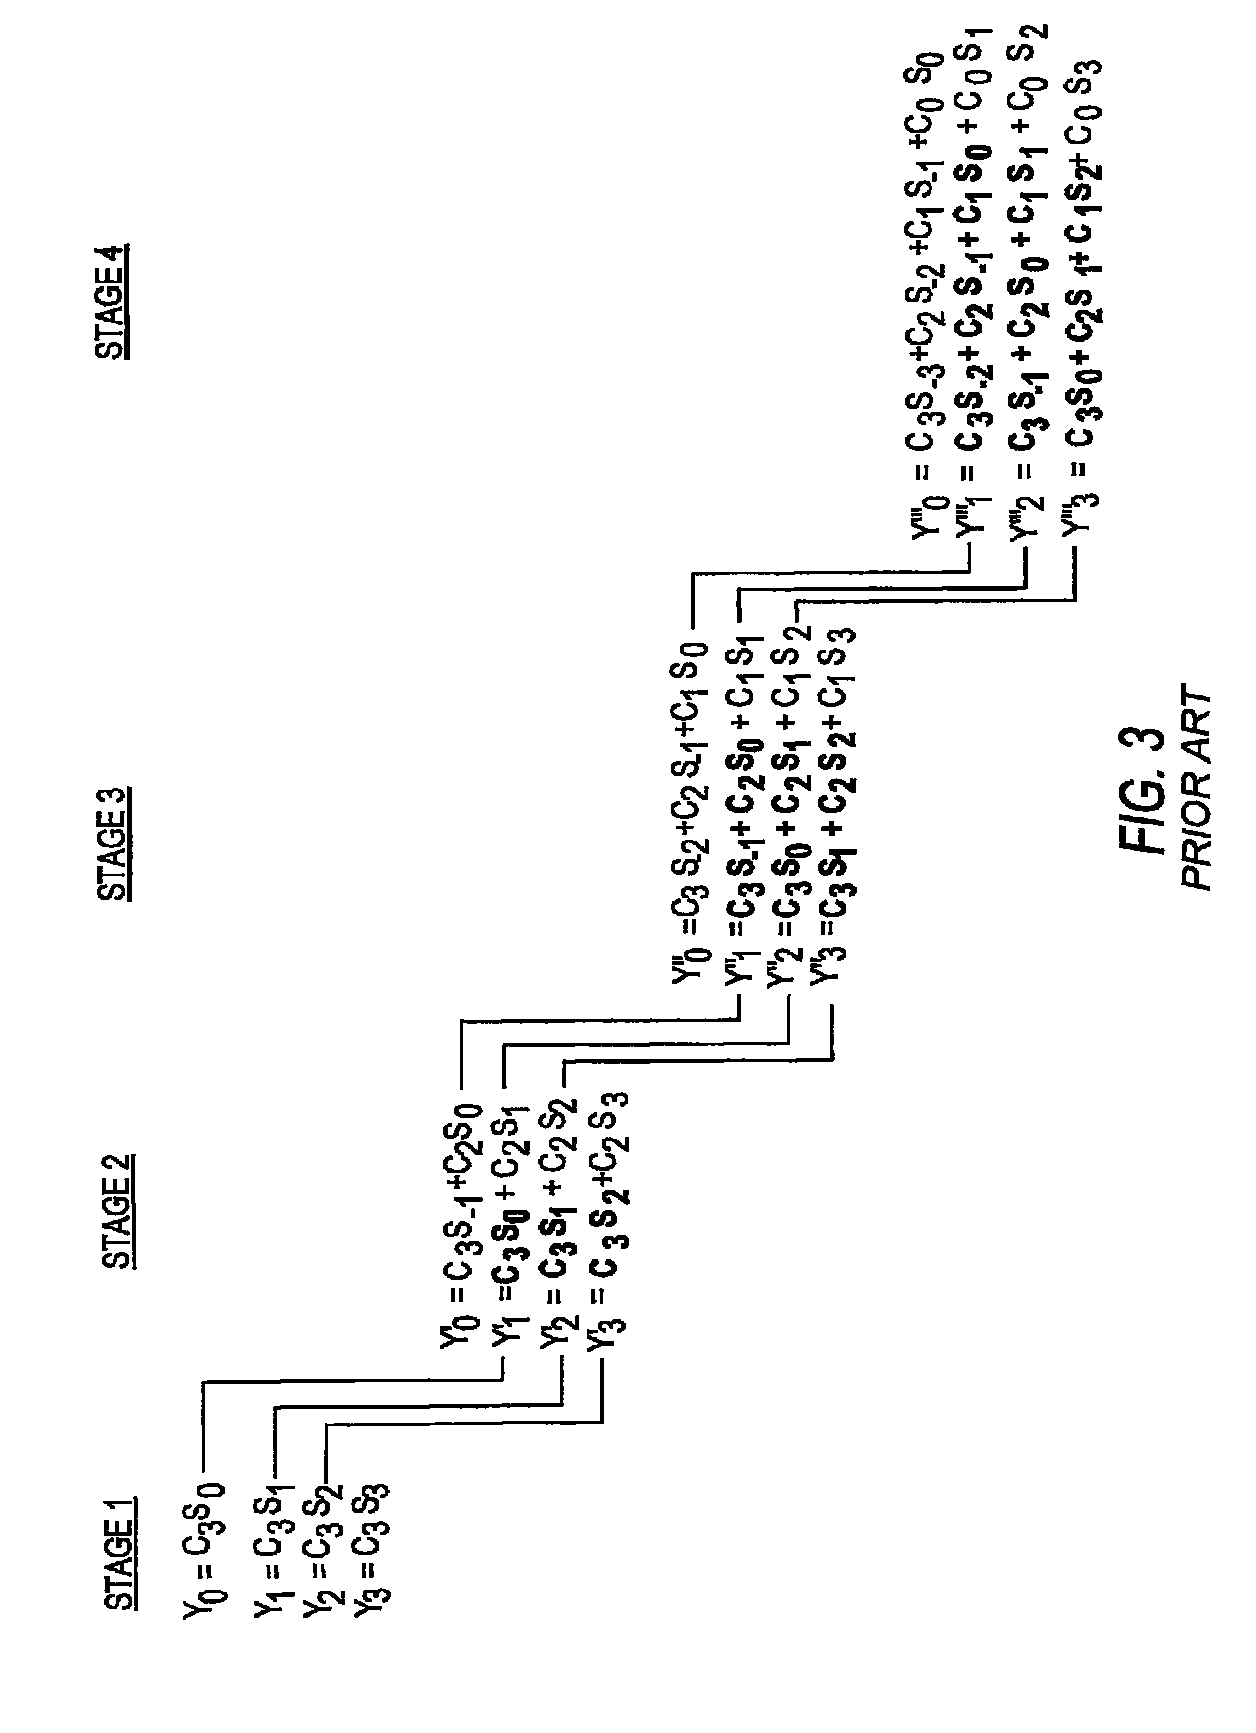 Method for configuring a finite impulse response filter in a programmable logic device